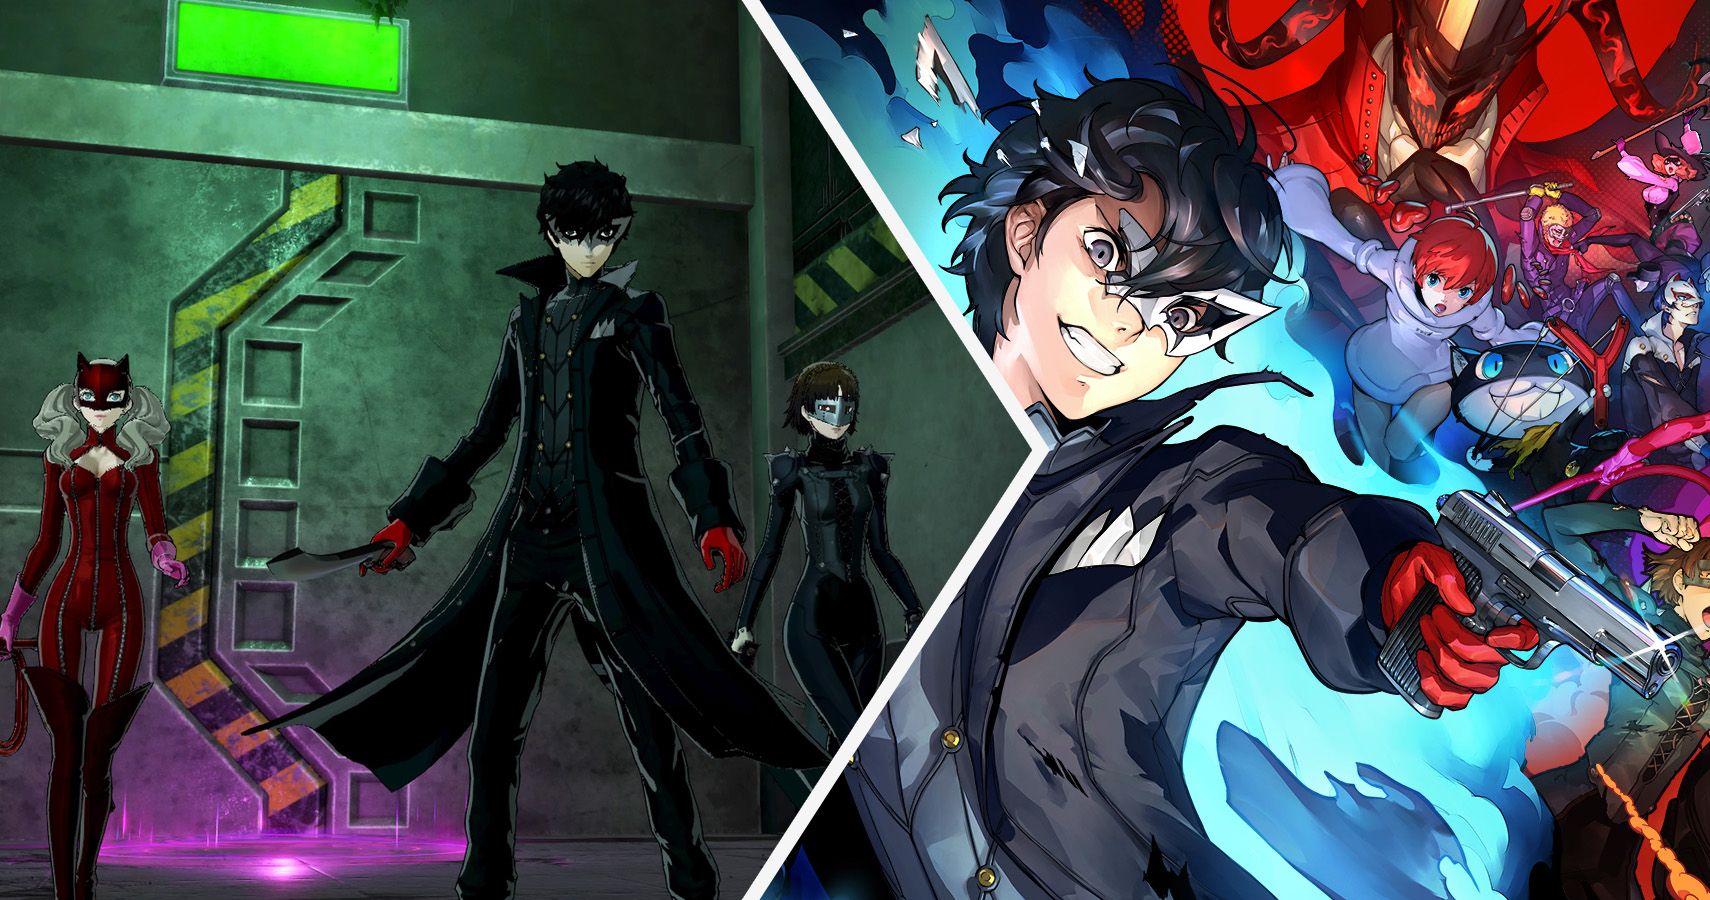 persona 5 strikers release date us